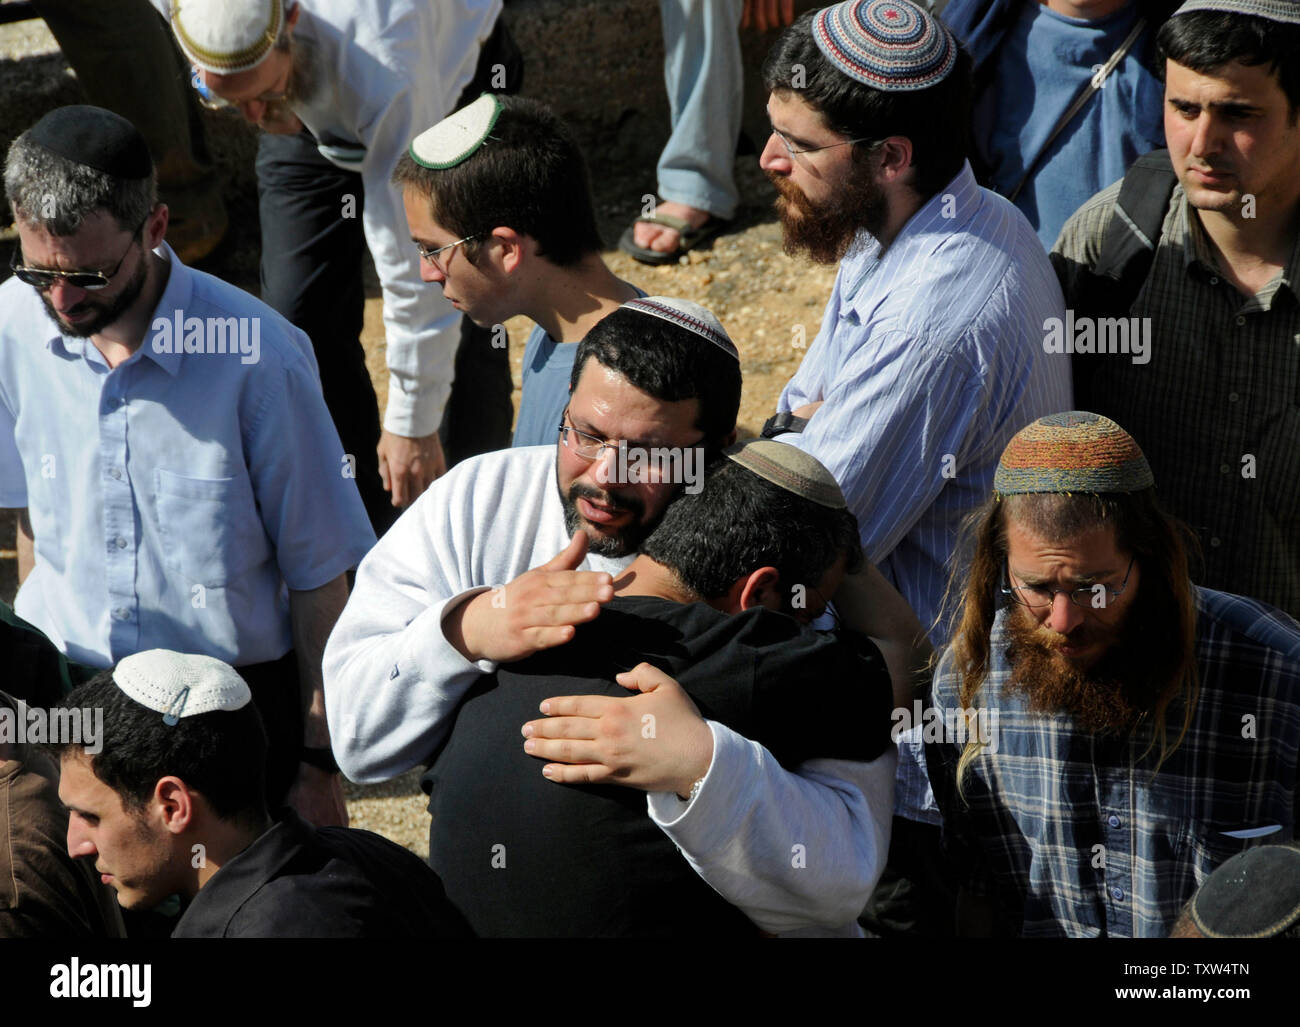 Israeli mourn at the funeral of Segev Avihayil, 15, on the Mt. of Olives in Jerusalem, March 7, 2008. Avihayil was one of eight yeshiva students killed Thursday night in a shooting attack by a Palestinian at the Mercaz Harav Yeshiva in Jerusalem.  (UPI Photo/Debbie Hill) Stock Photo